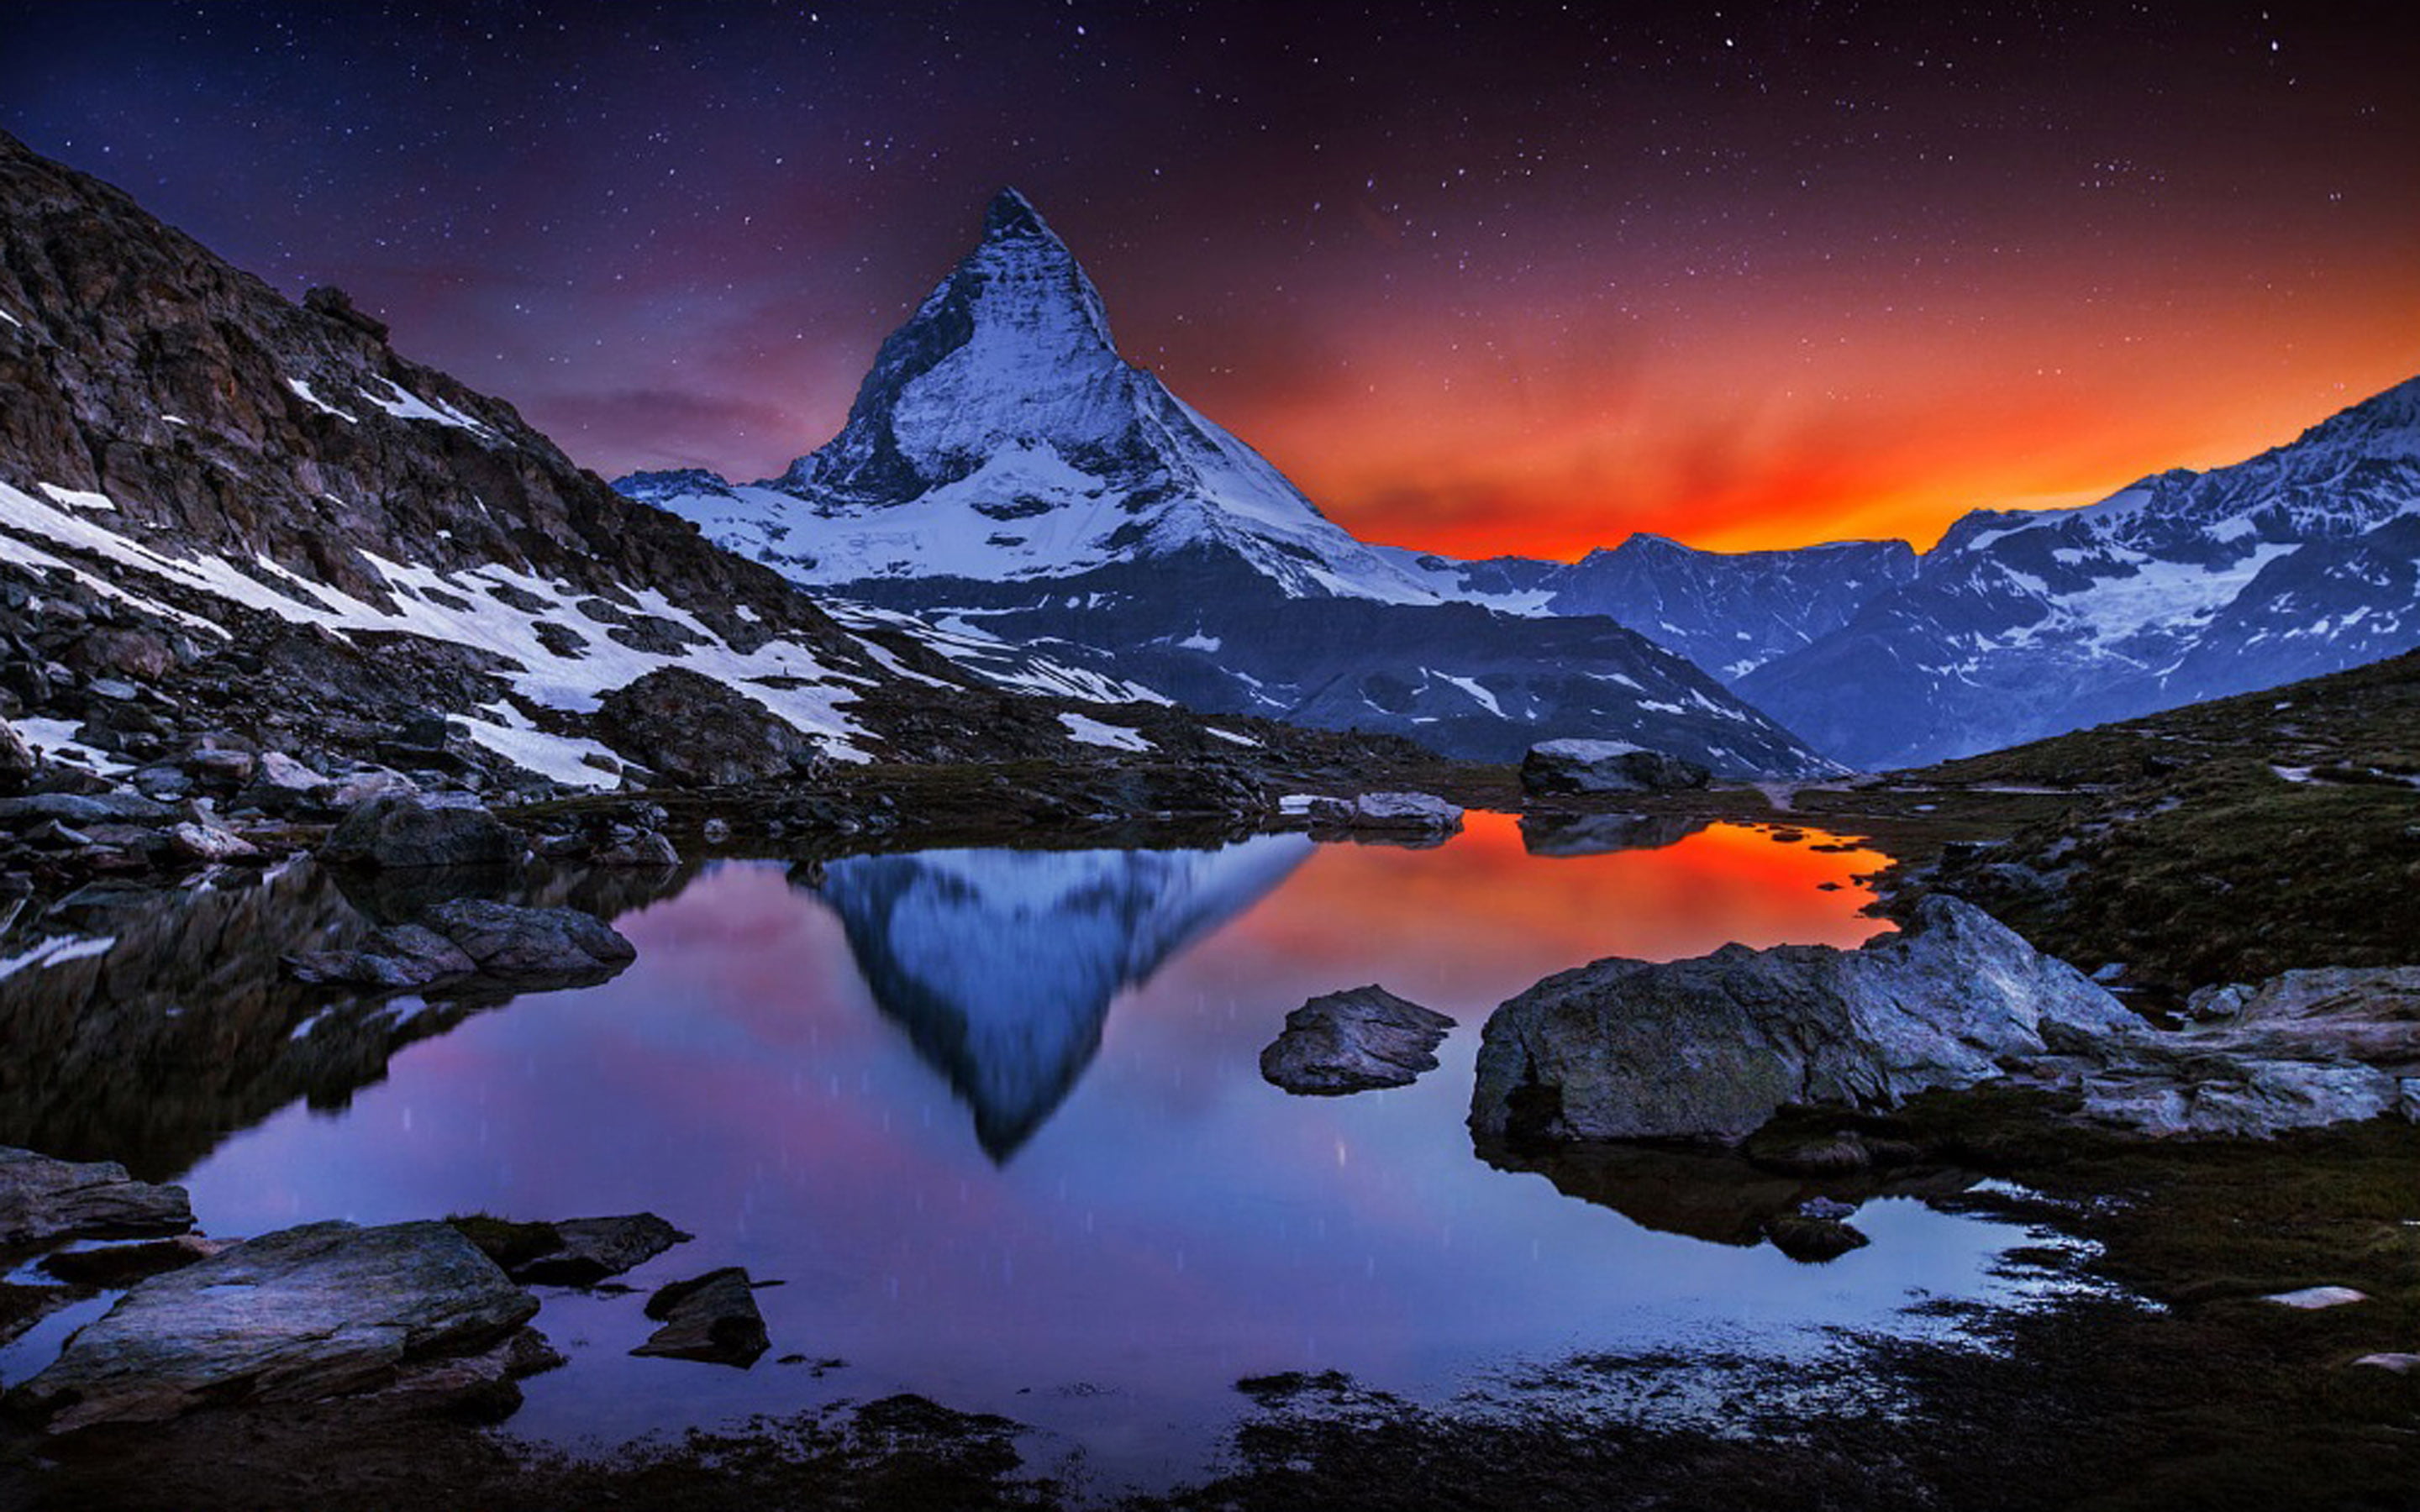 The Matterhorn German Excuse Matərˌhɔrn Is A Mountain In The Alps Between Switzerland And Italy